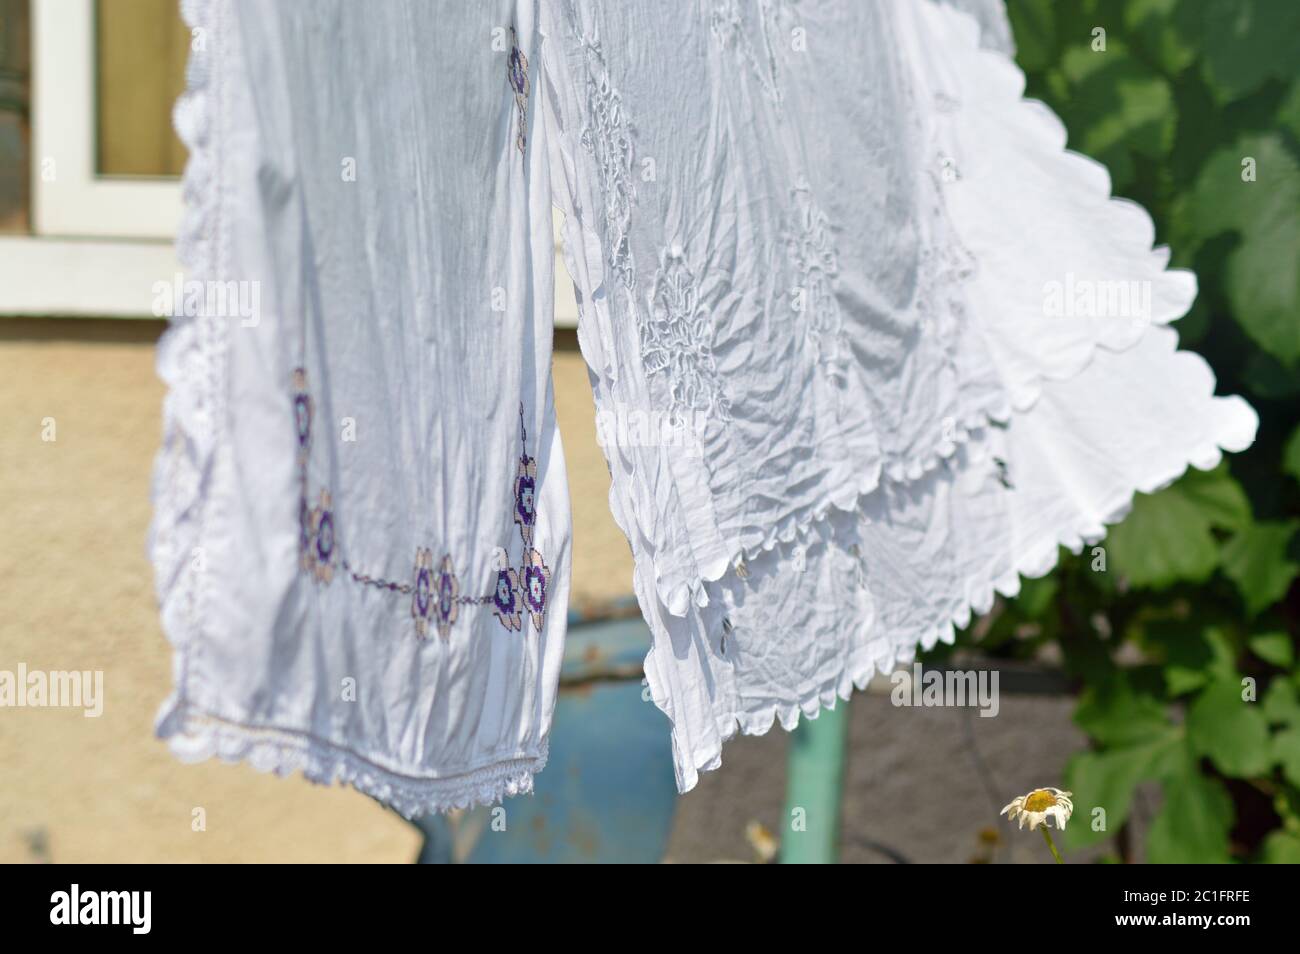 Traditional embroidered linen hanging on laundry rope Stock Photo